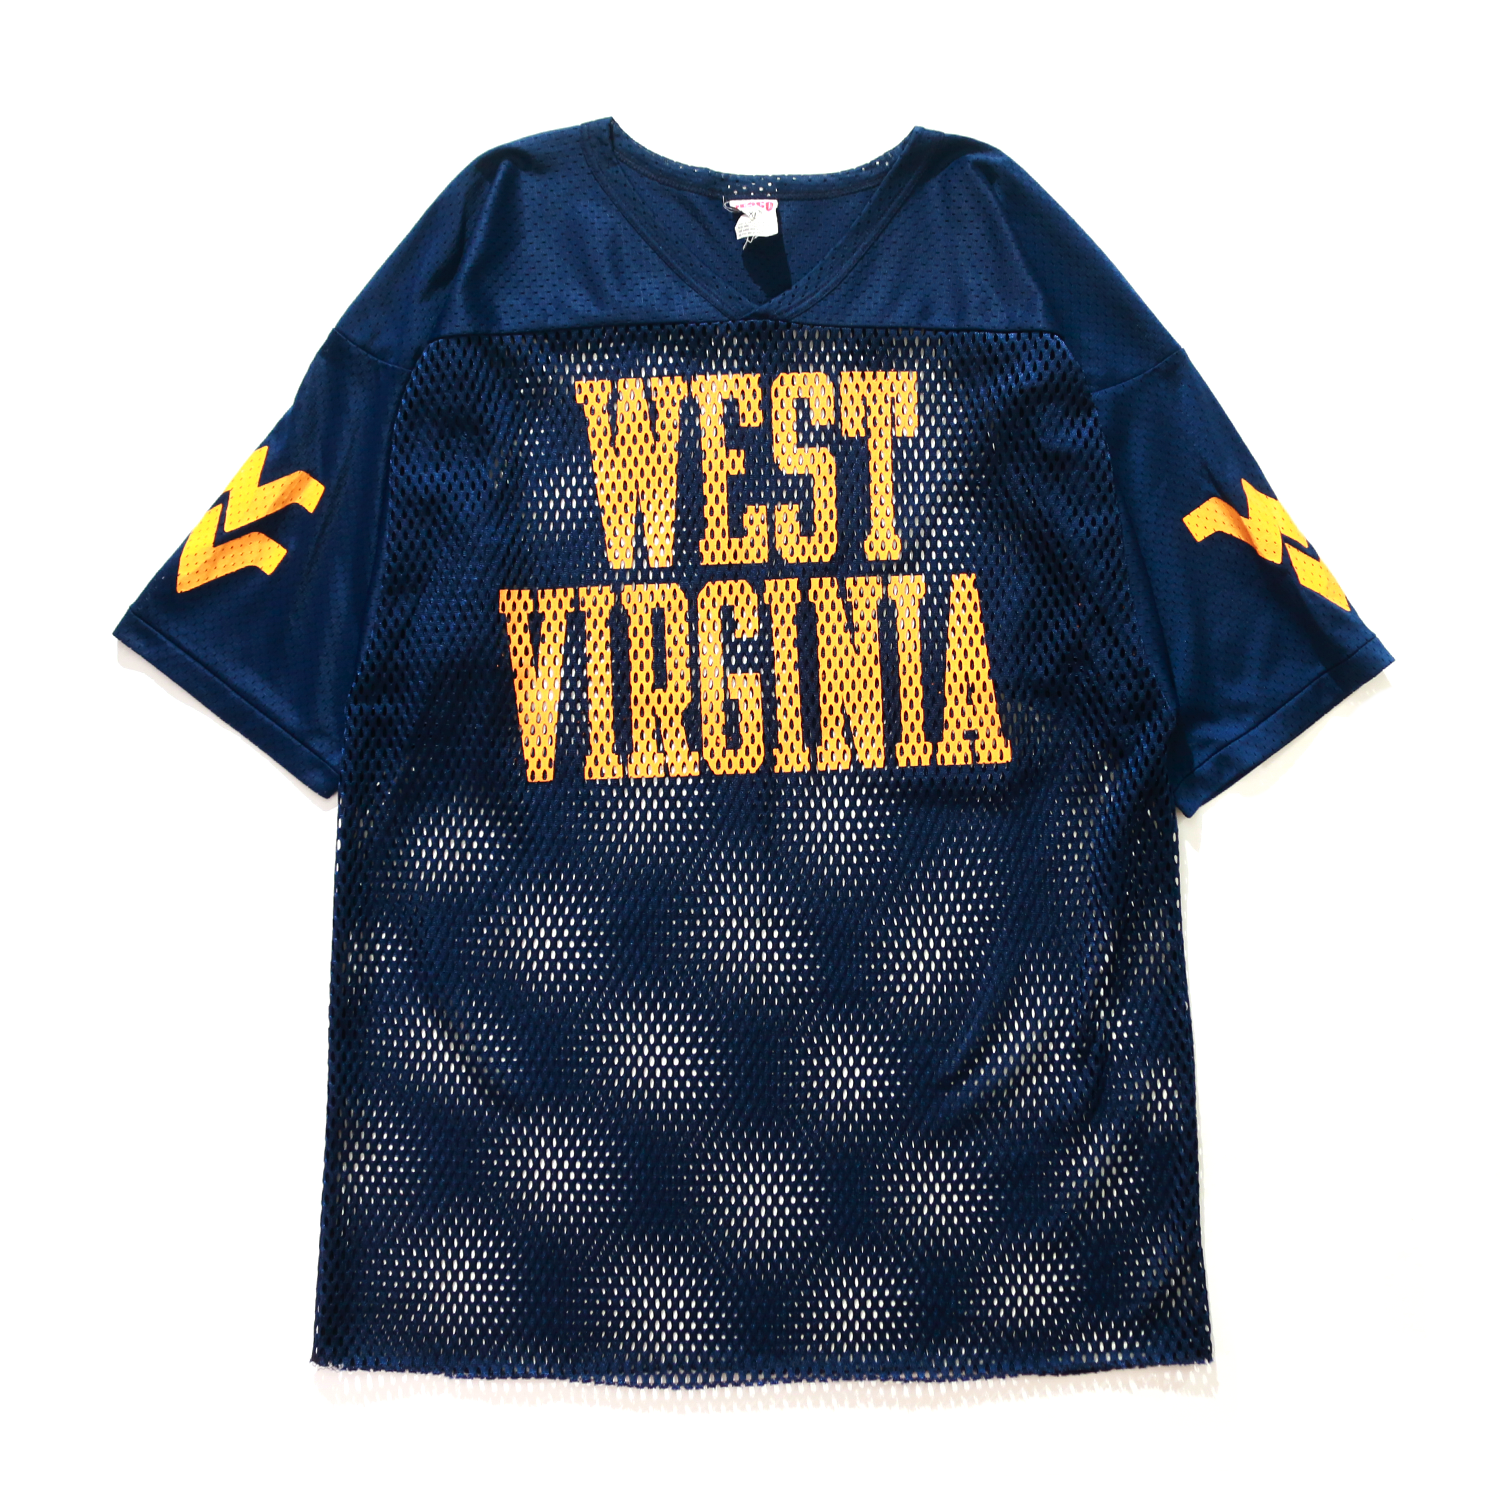 <img class='new_mark_img1' src='https://img.shop-pro.jp/img/new/icons8.gif' style='border:none;display:inline;margin:0px;padding:0px;width:auto;' />Vintage Clothes / 90s WEST VIRGINIA Mesh Football Tee